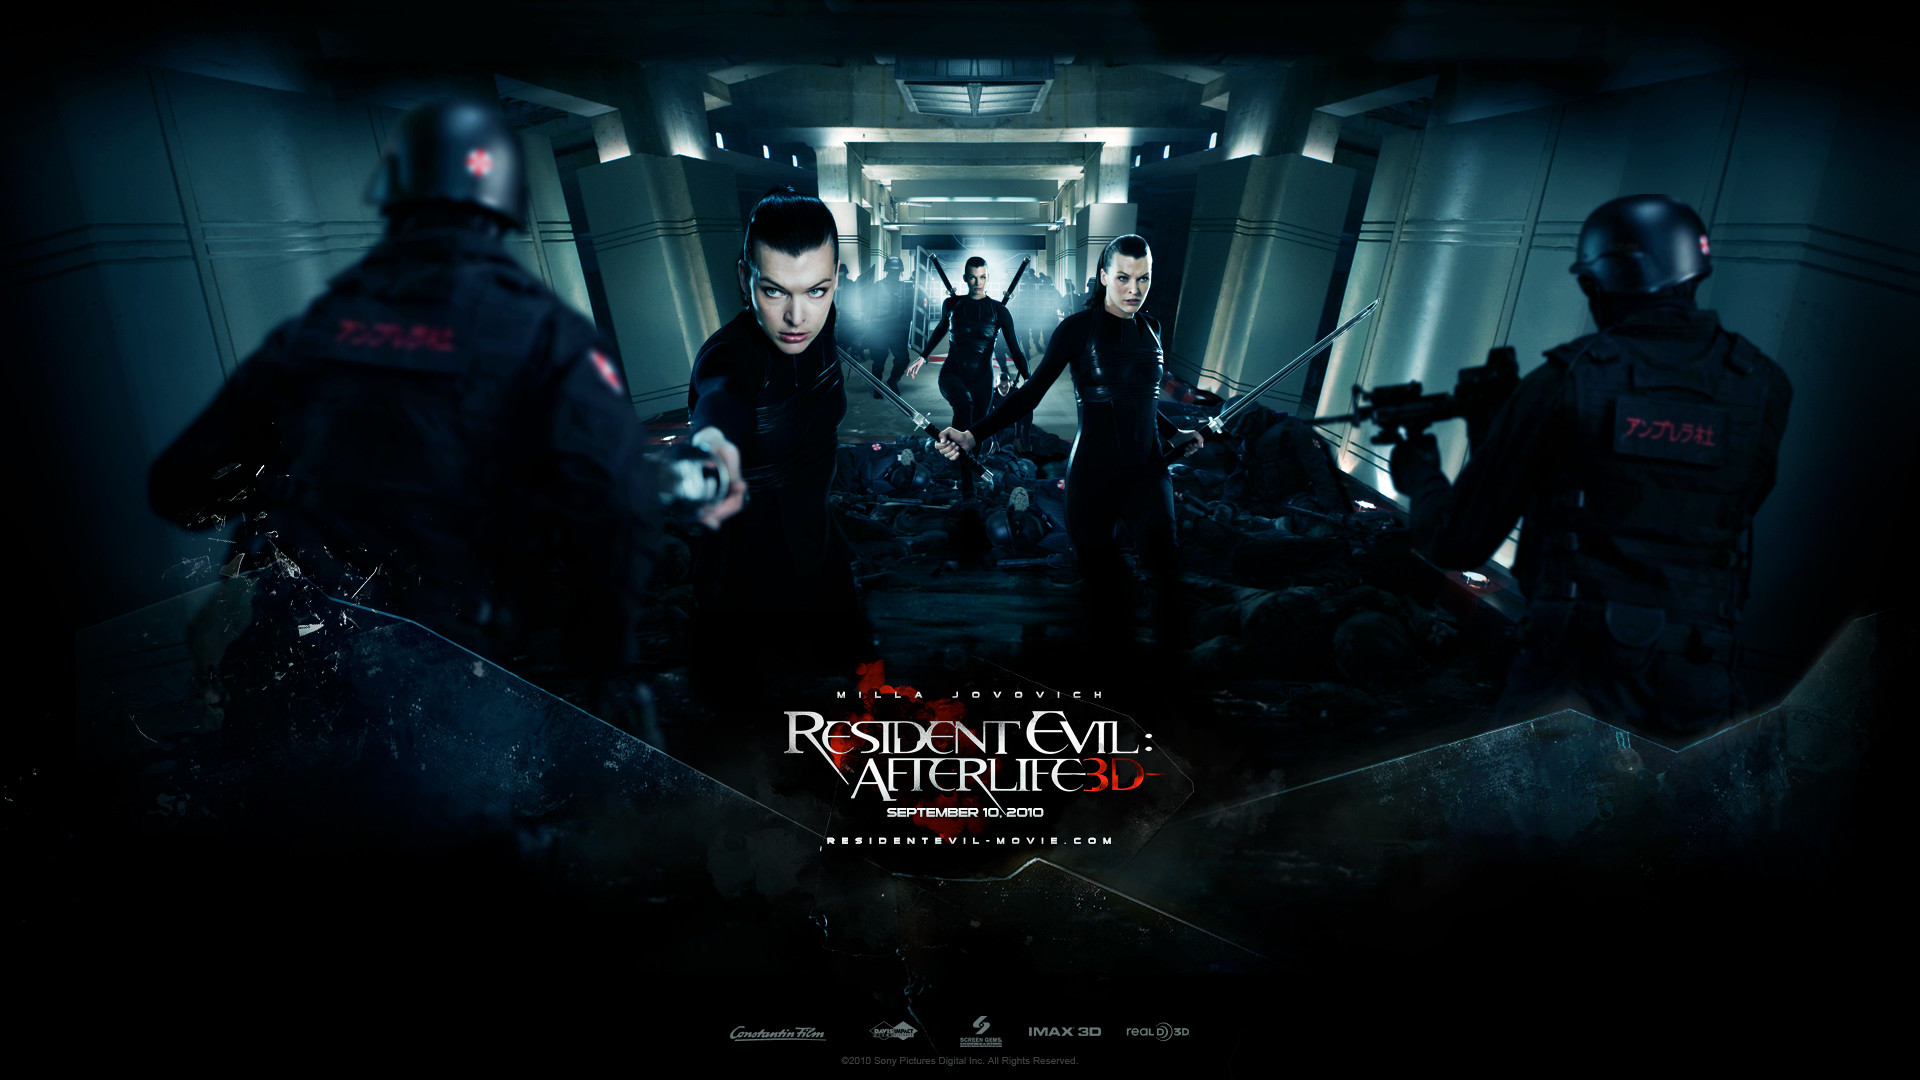 1920x1080 Milla Jovovich in Resident Evil: Afterlife Wallpaper 2 Wallpapers - HD .